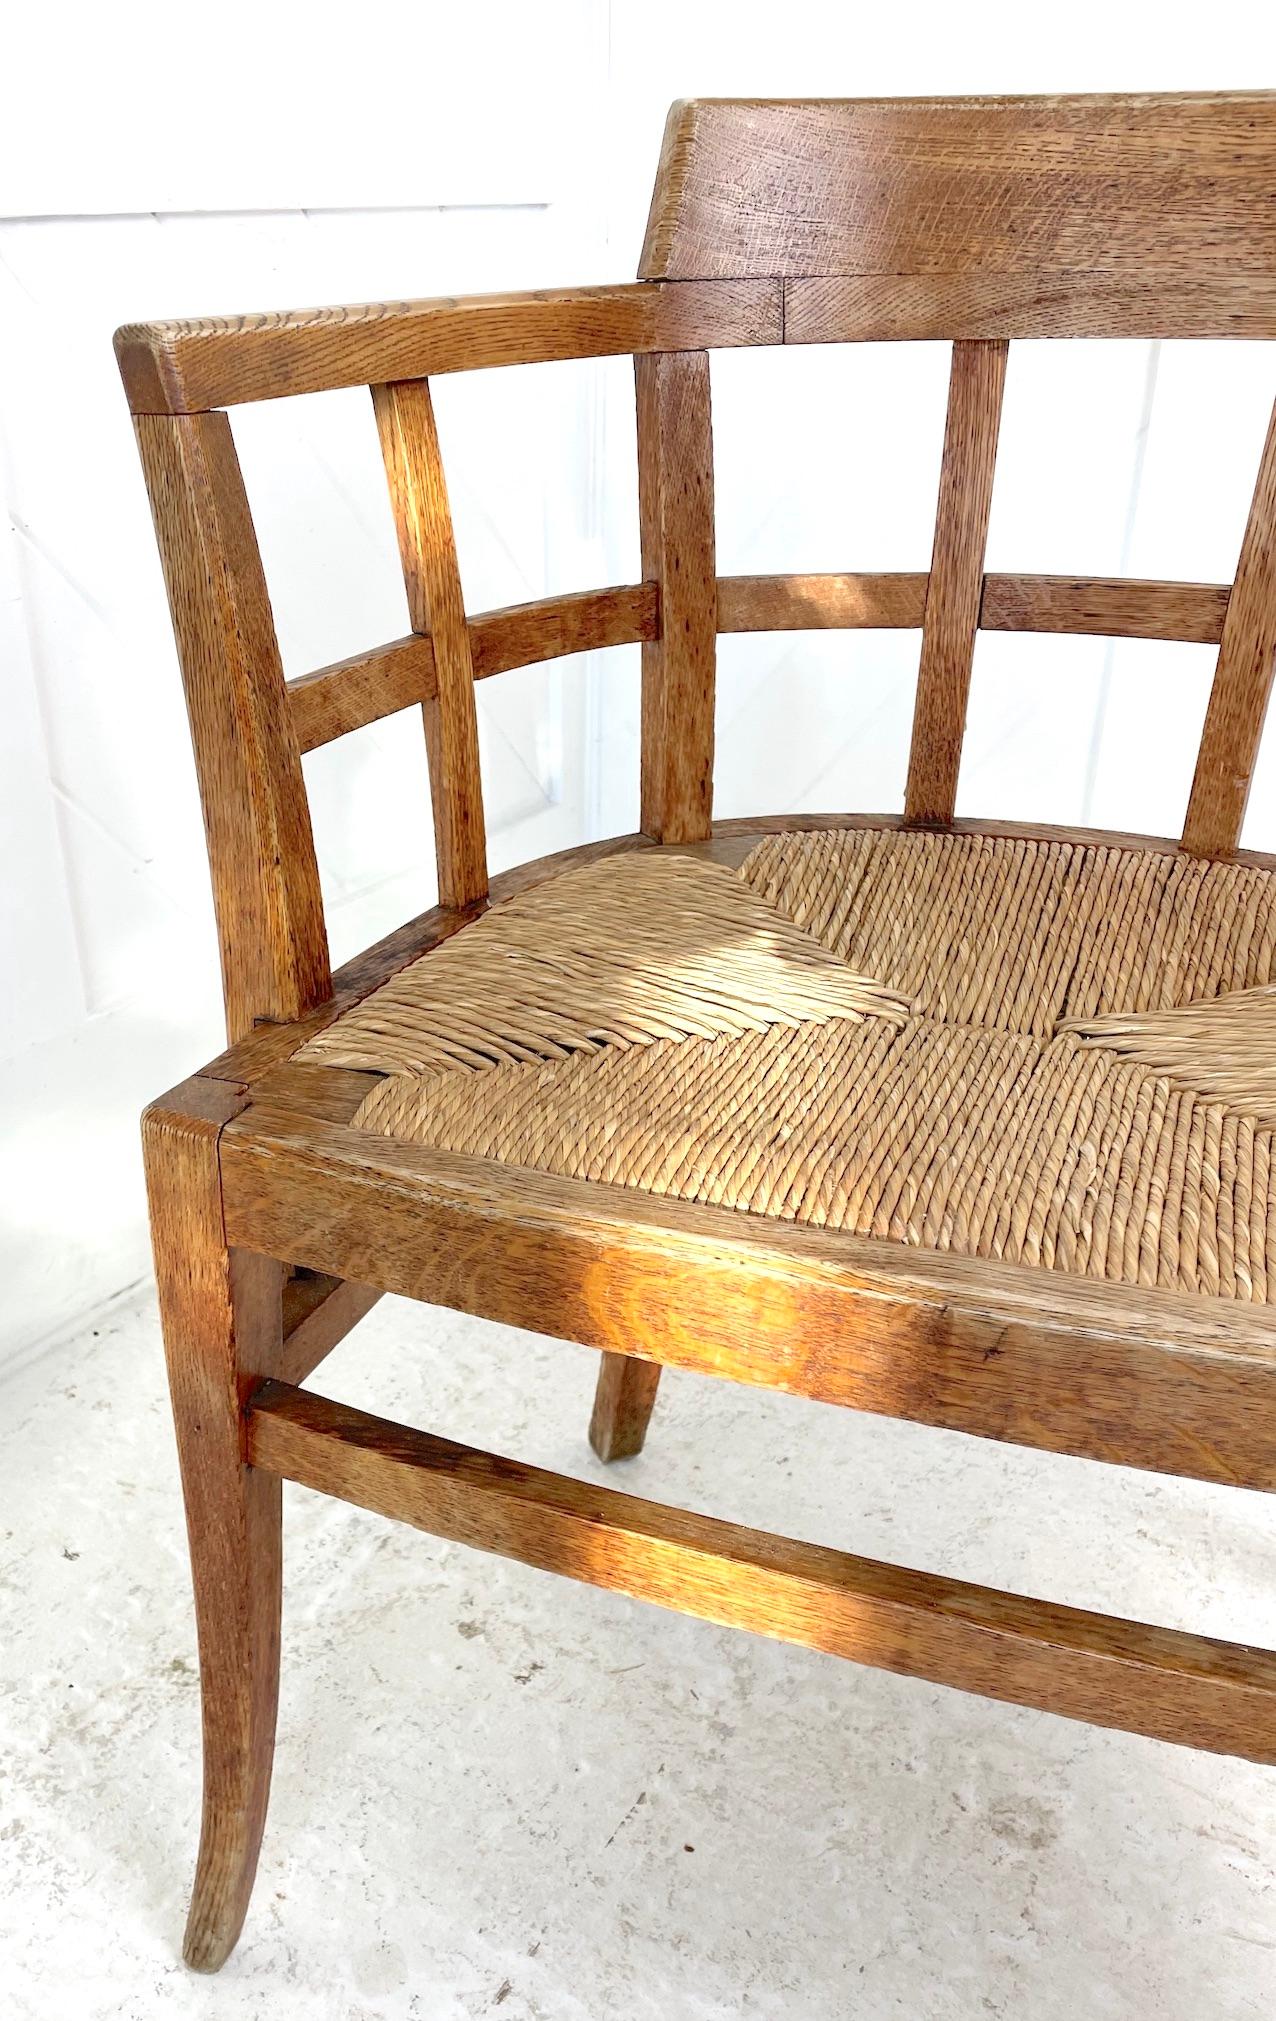 This is an oak lattice back desk chair with shaped arms and drop-in rush seat
Retailed and designed by Heals
Circa 1920
Sir Ambrose Heal 1872 -1915 — HEAL & SON
Ambrose Heal was the great-grandson of John Harris Heal, founder of the Heals